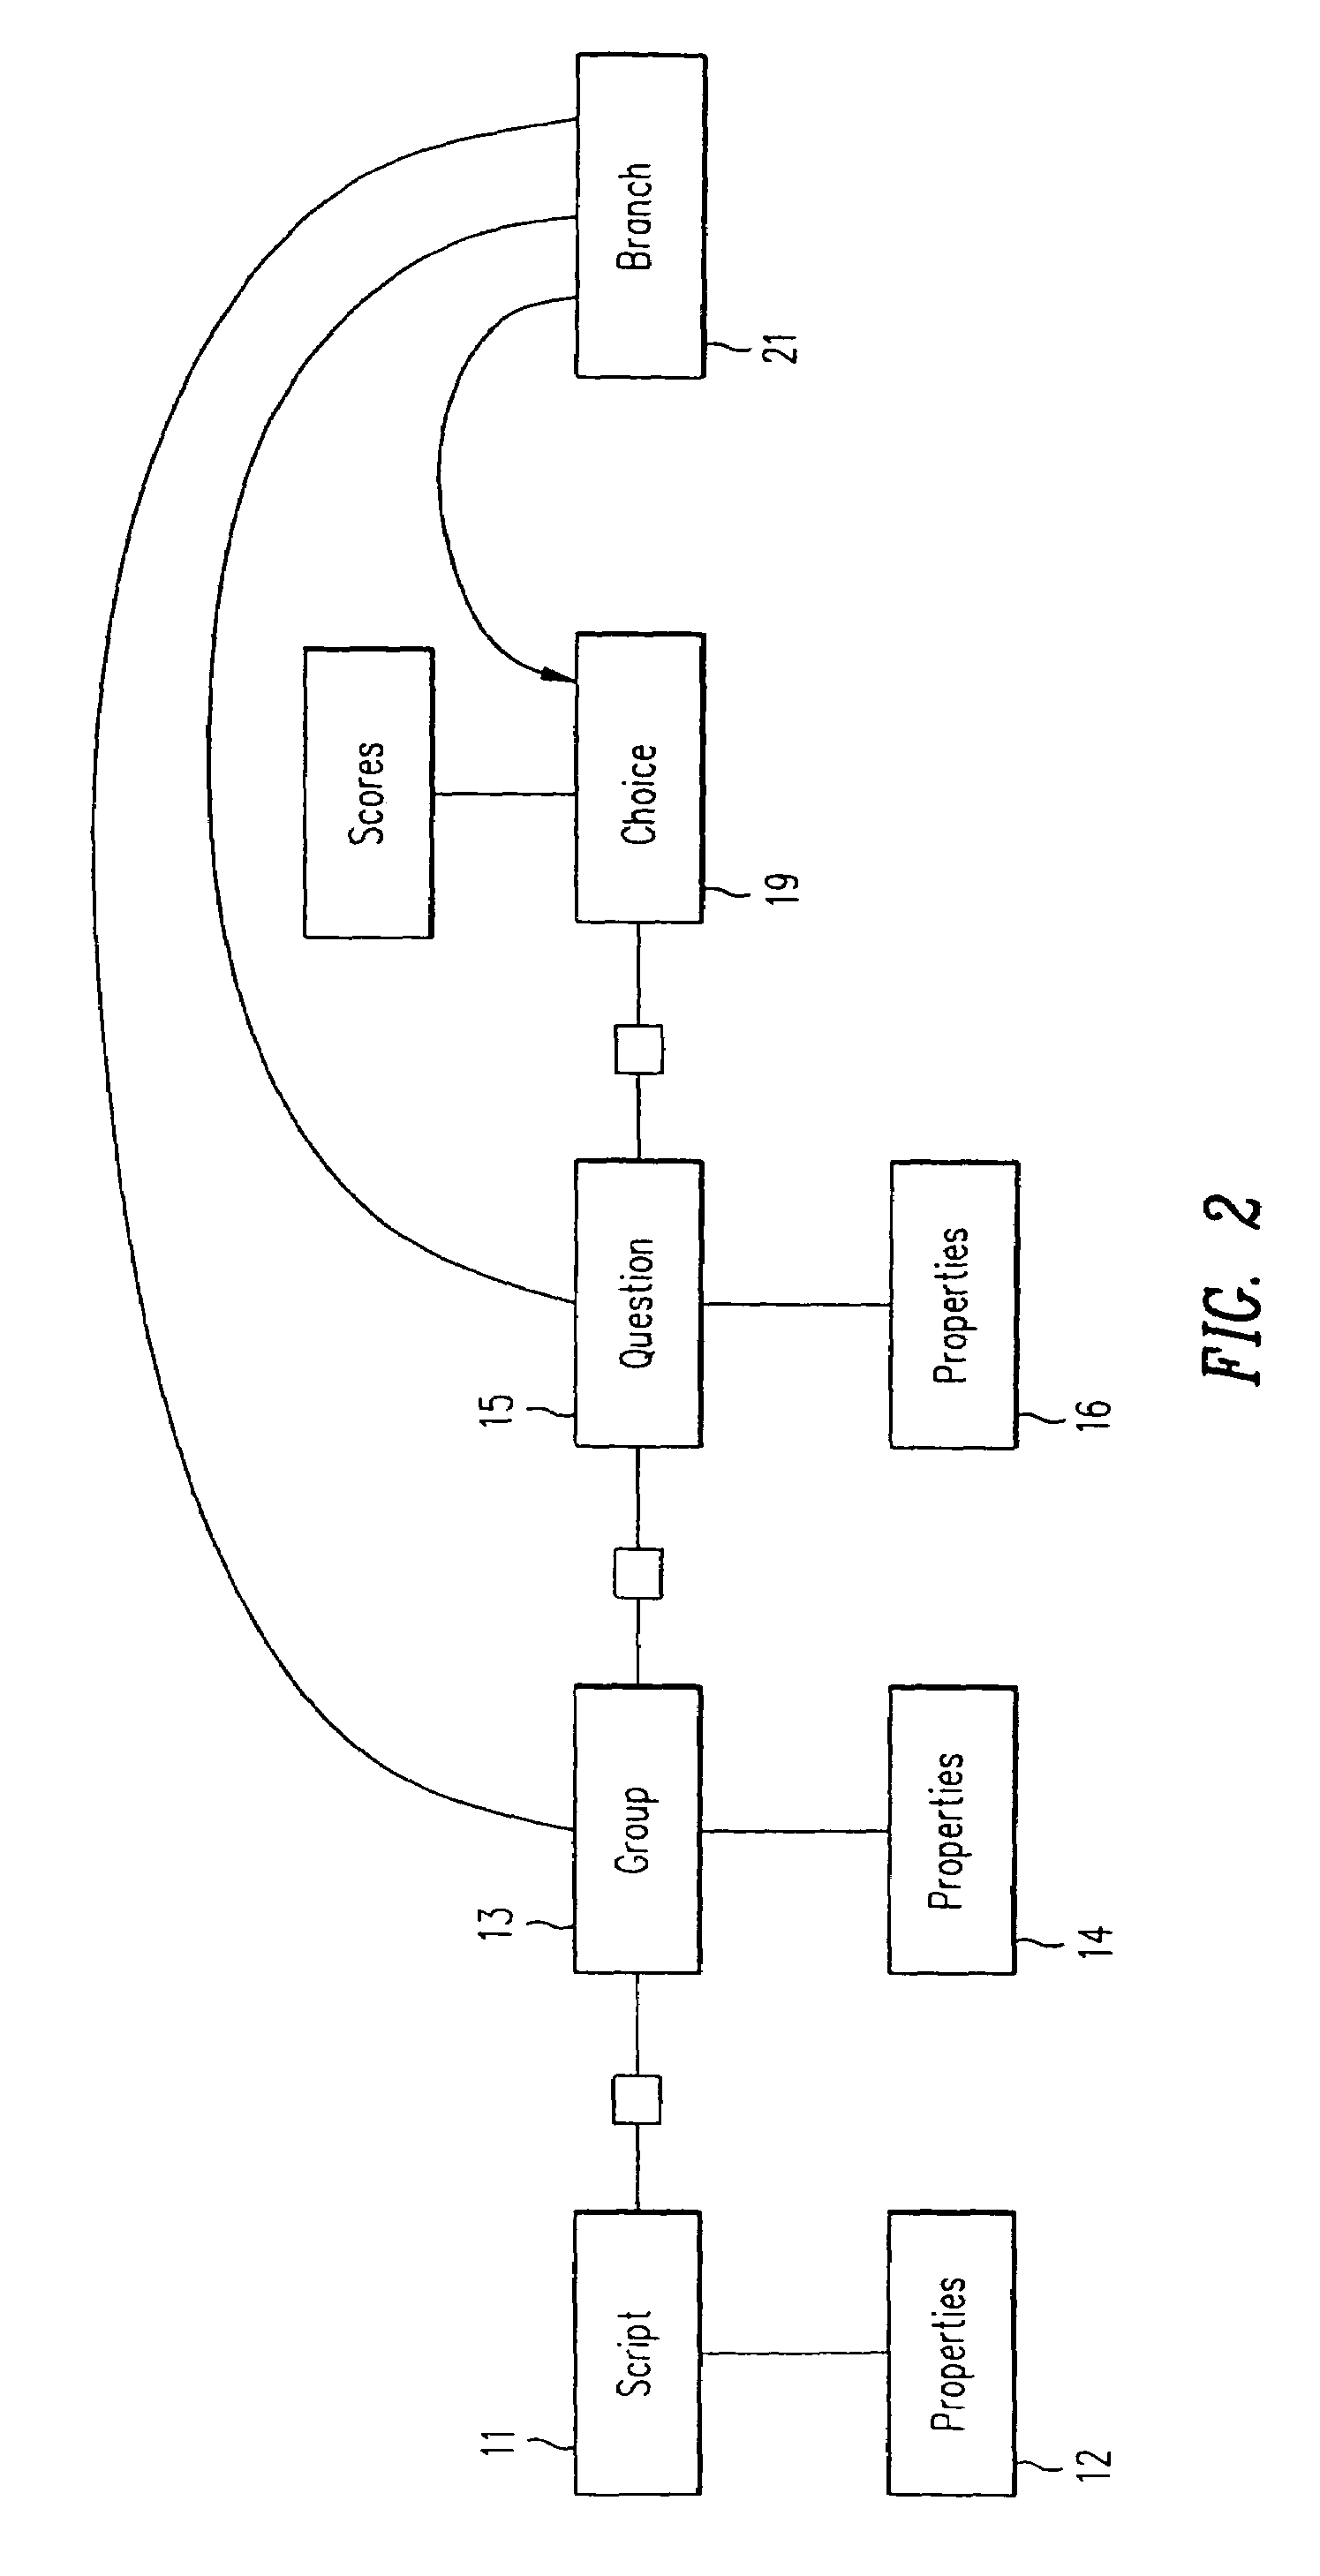 System and method for smart scripting call centers and configuration thereof